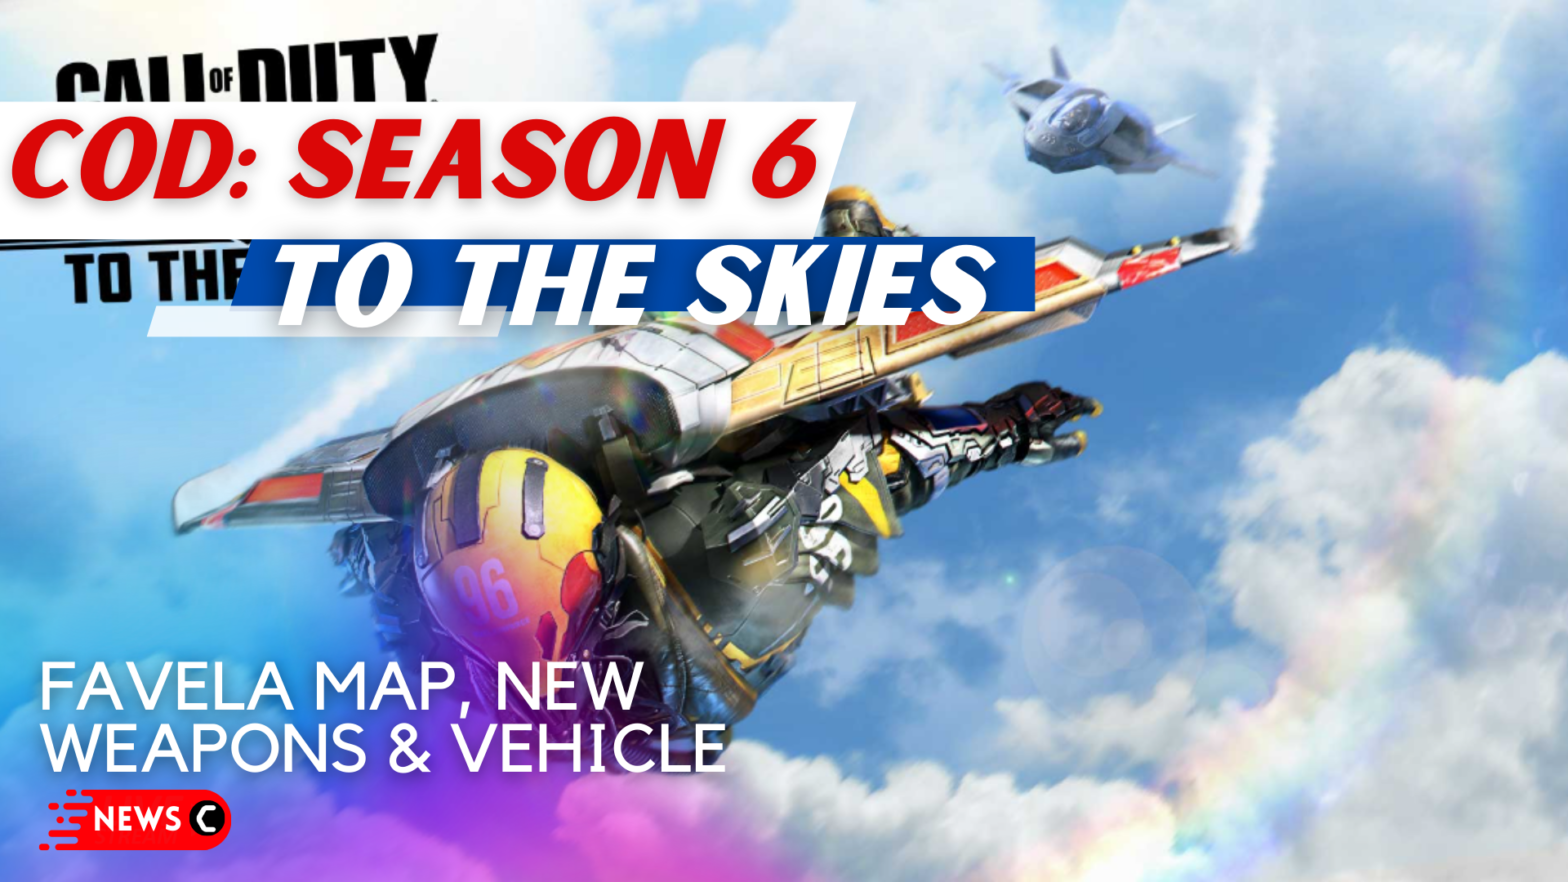 CoD Mobile Season 6: To the Skies| Favela map, new weapons & vehicle